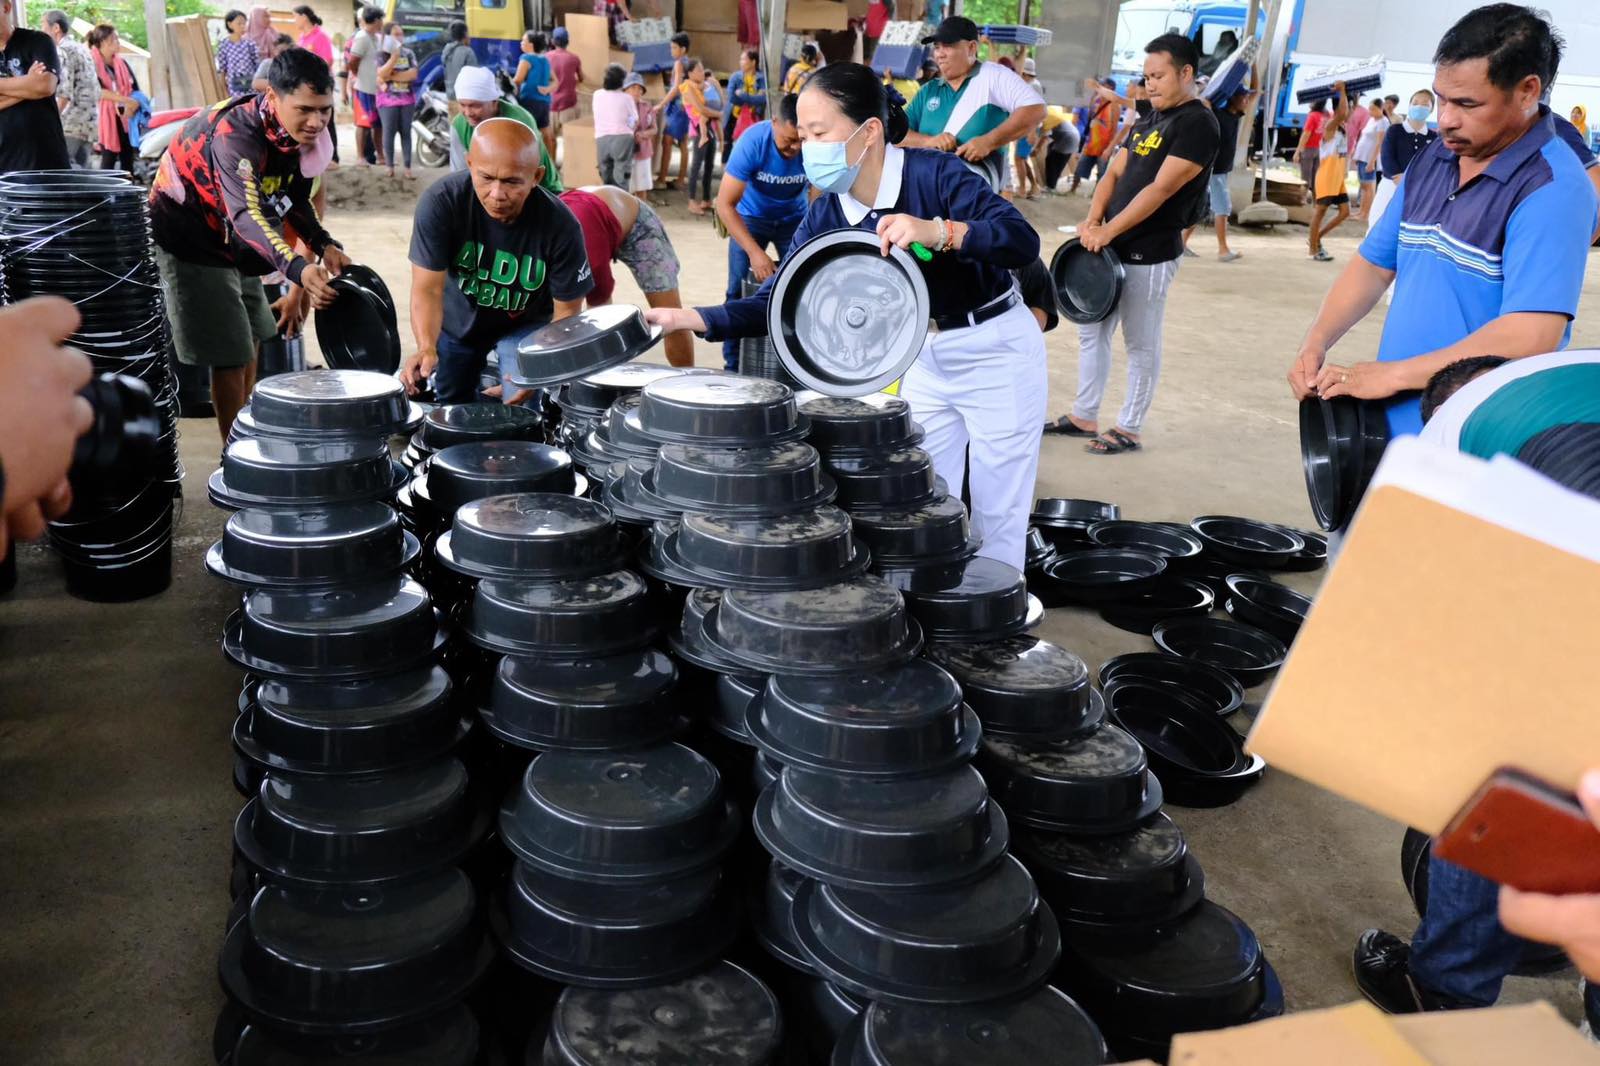 Tzu Chi Commissioner, Sis. Yanyan Guo carefully arranged the pails in a row.【Photo by Tzu Chi Davao】